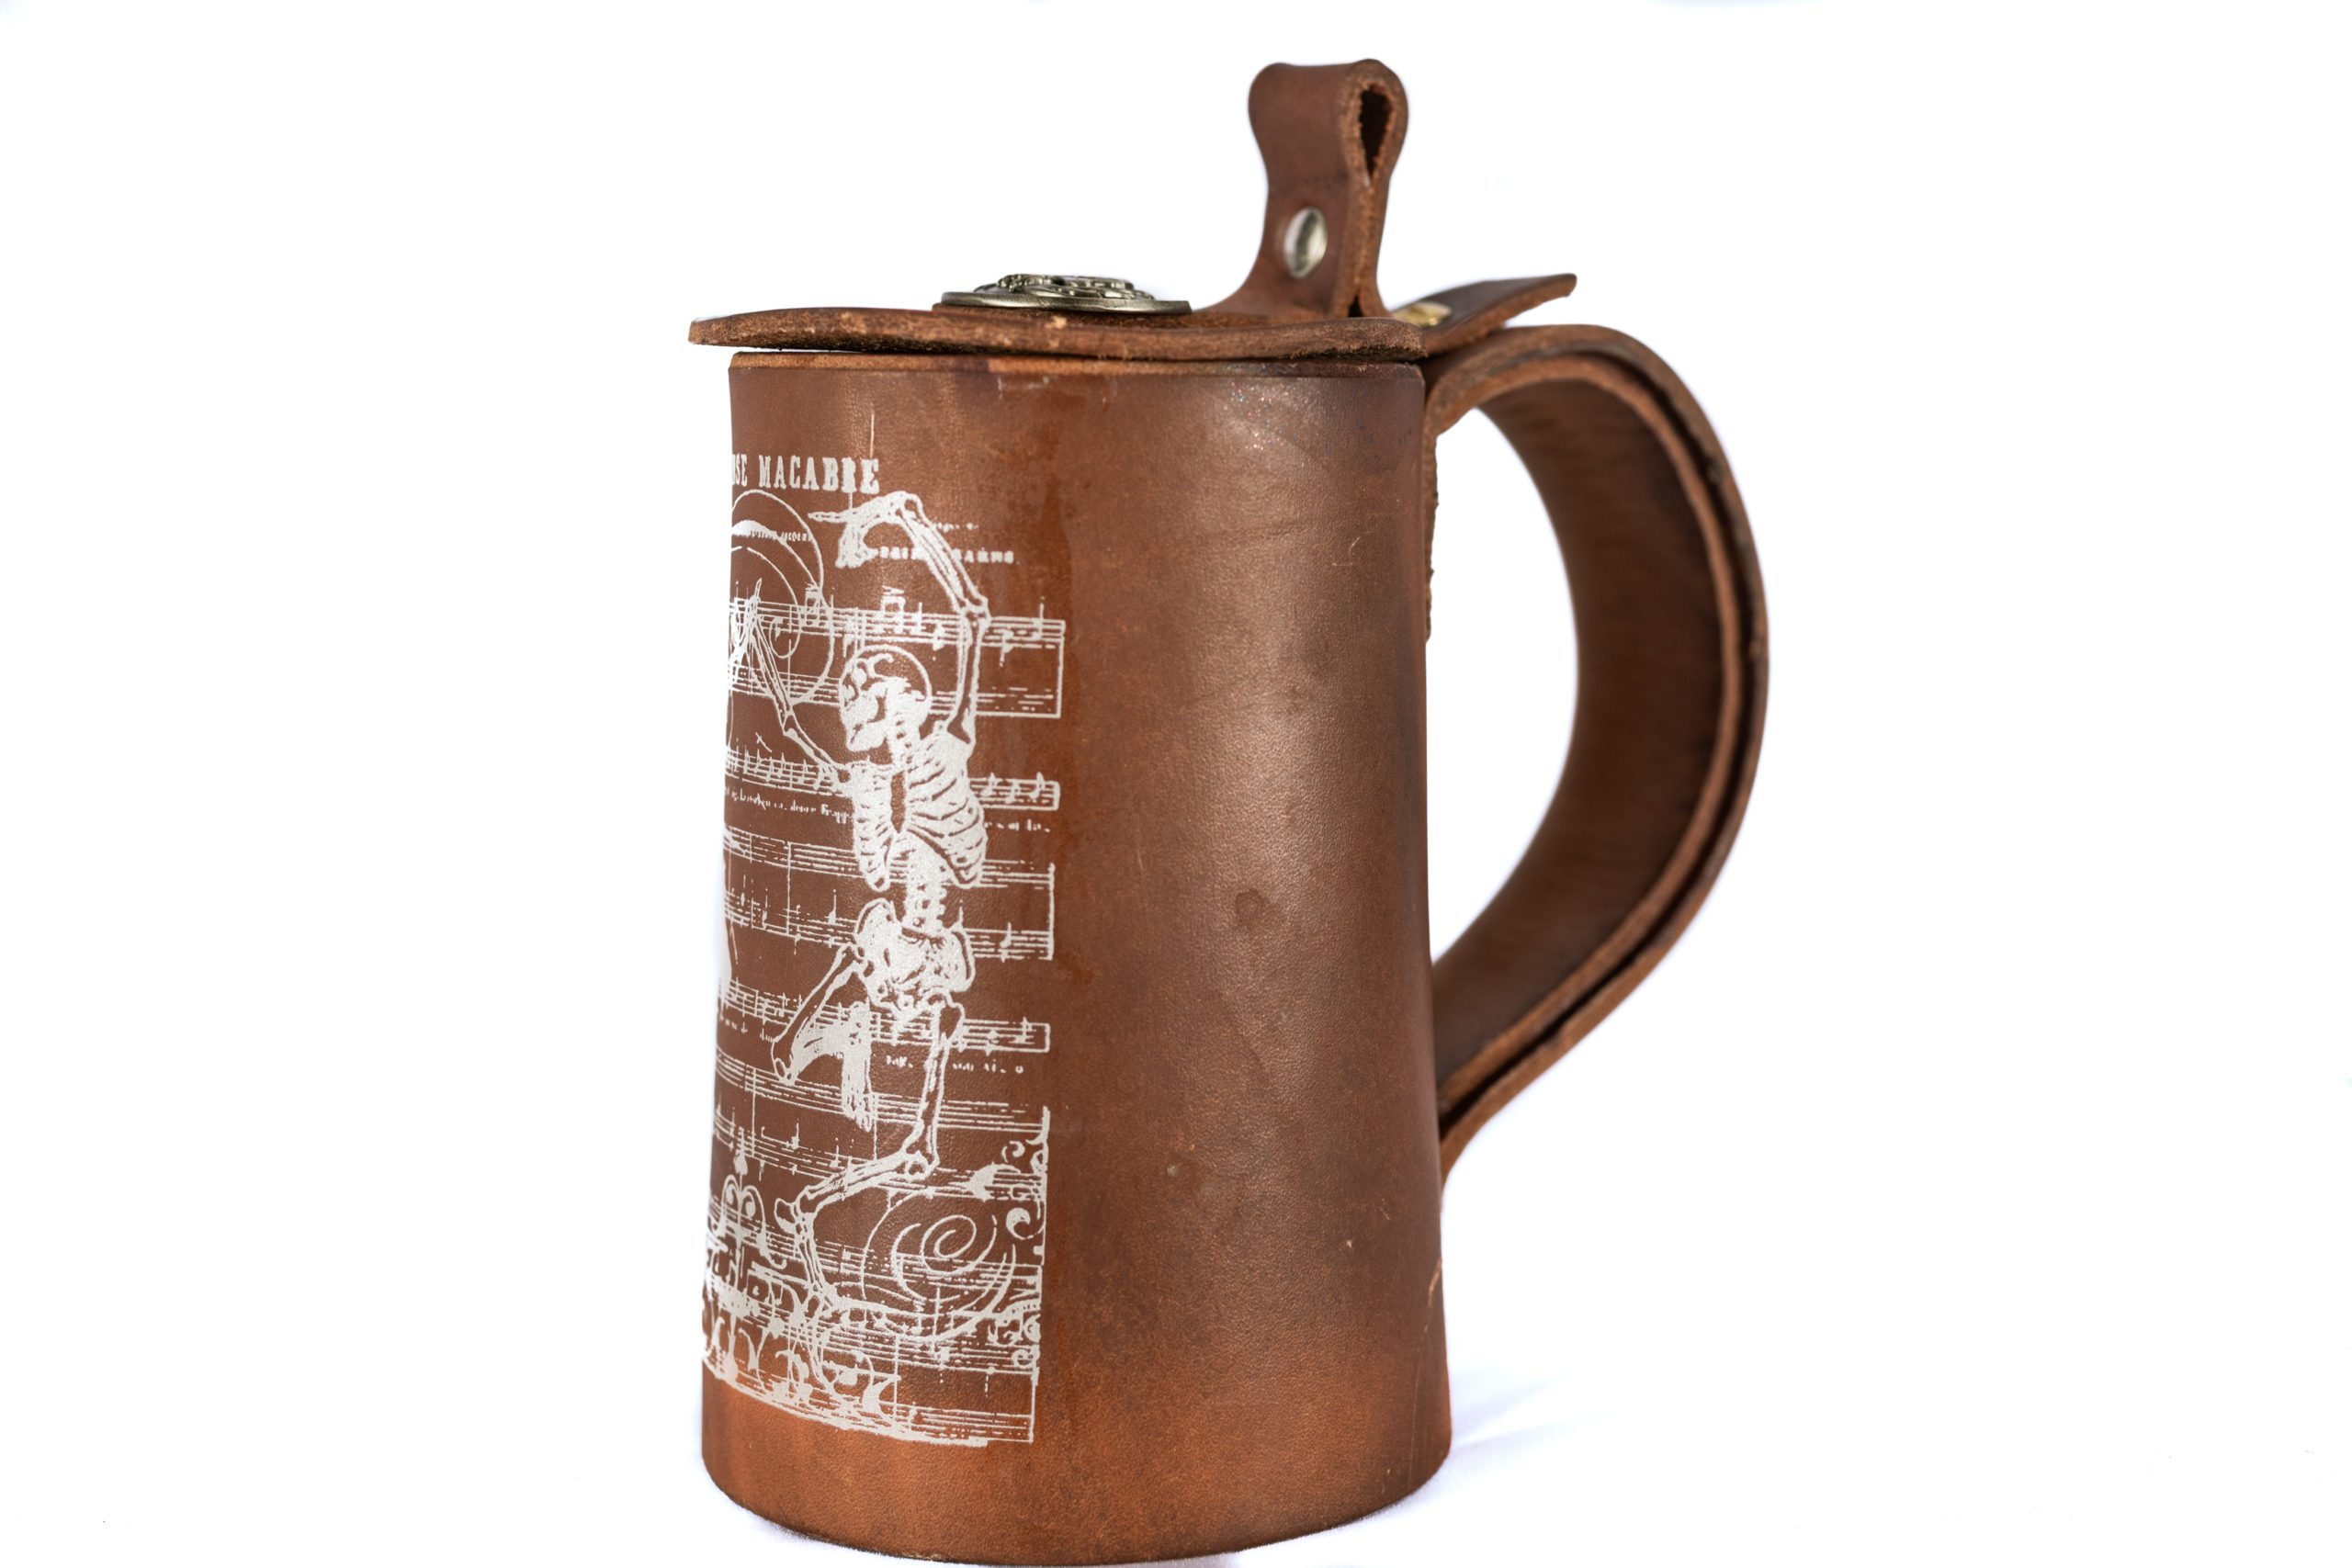 Leather Danse Macabre flagon mug with attached lid